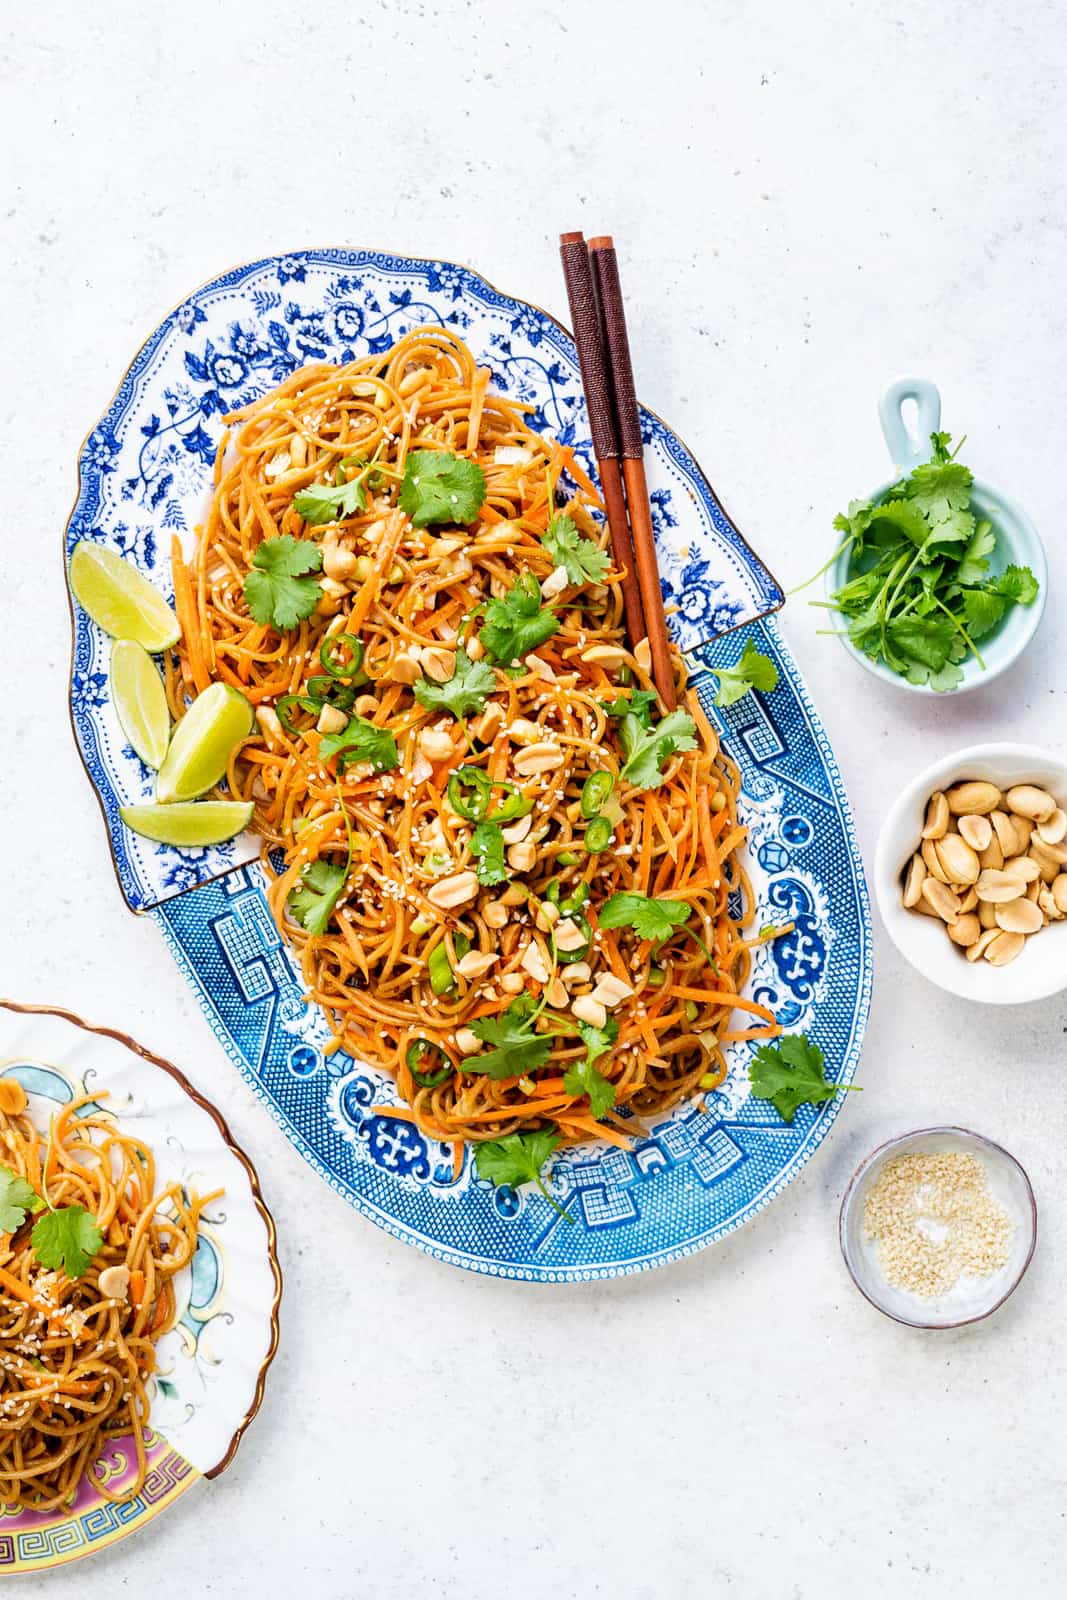 platter of spicy peanut noodles with carrot and coriander